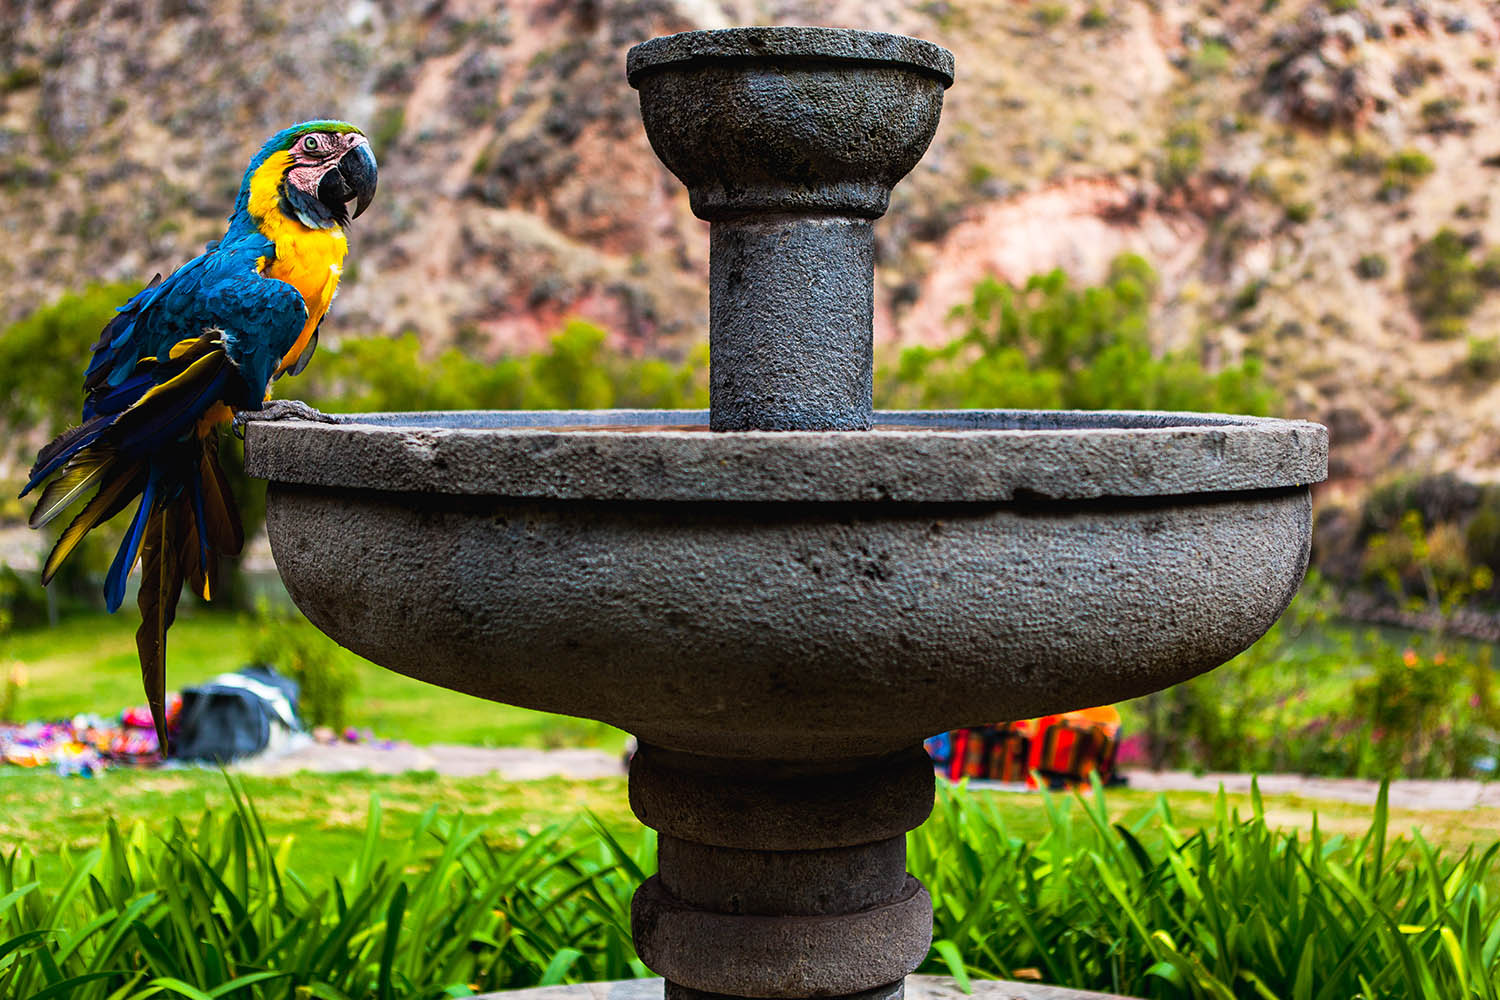 Parrot resting on water fountain